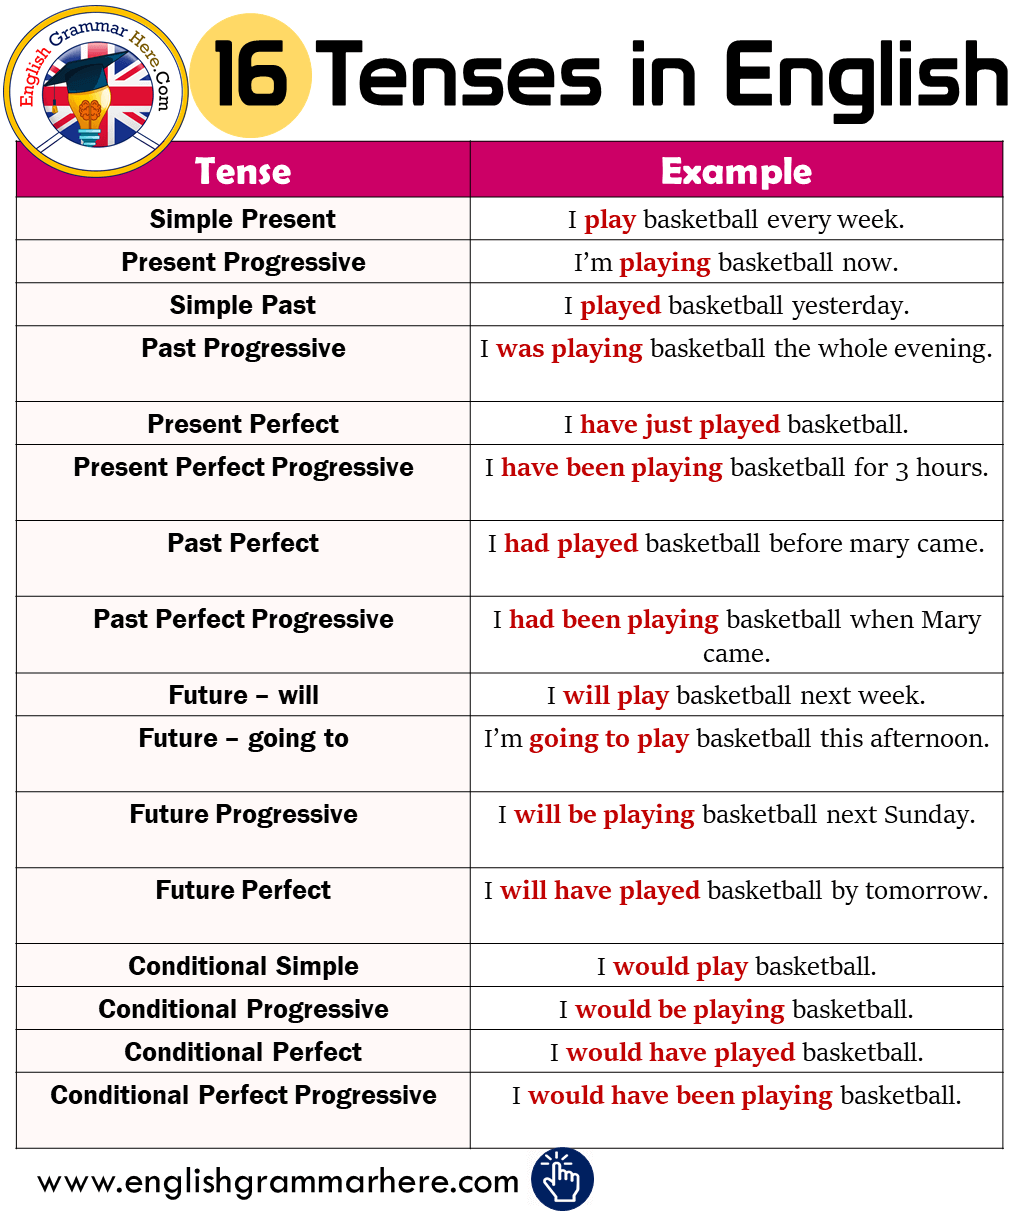 16 Tenses and Example Sentences in English